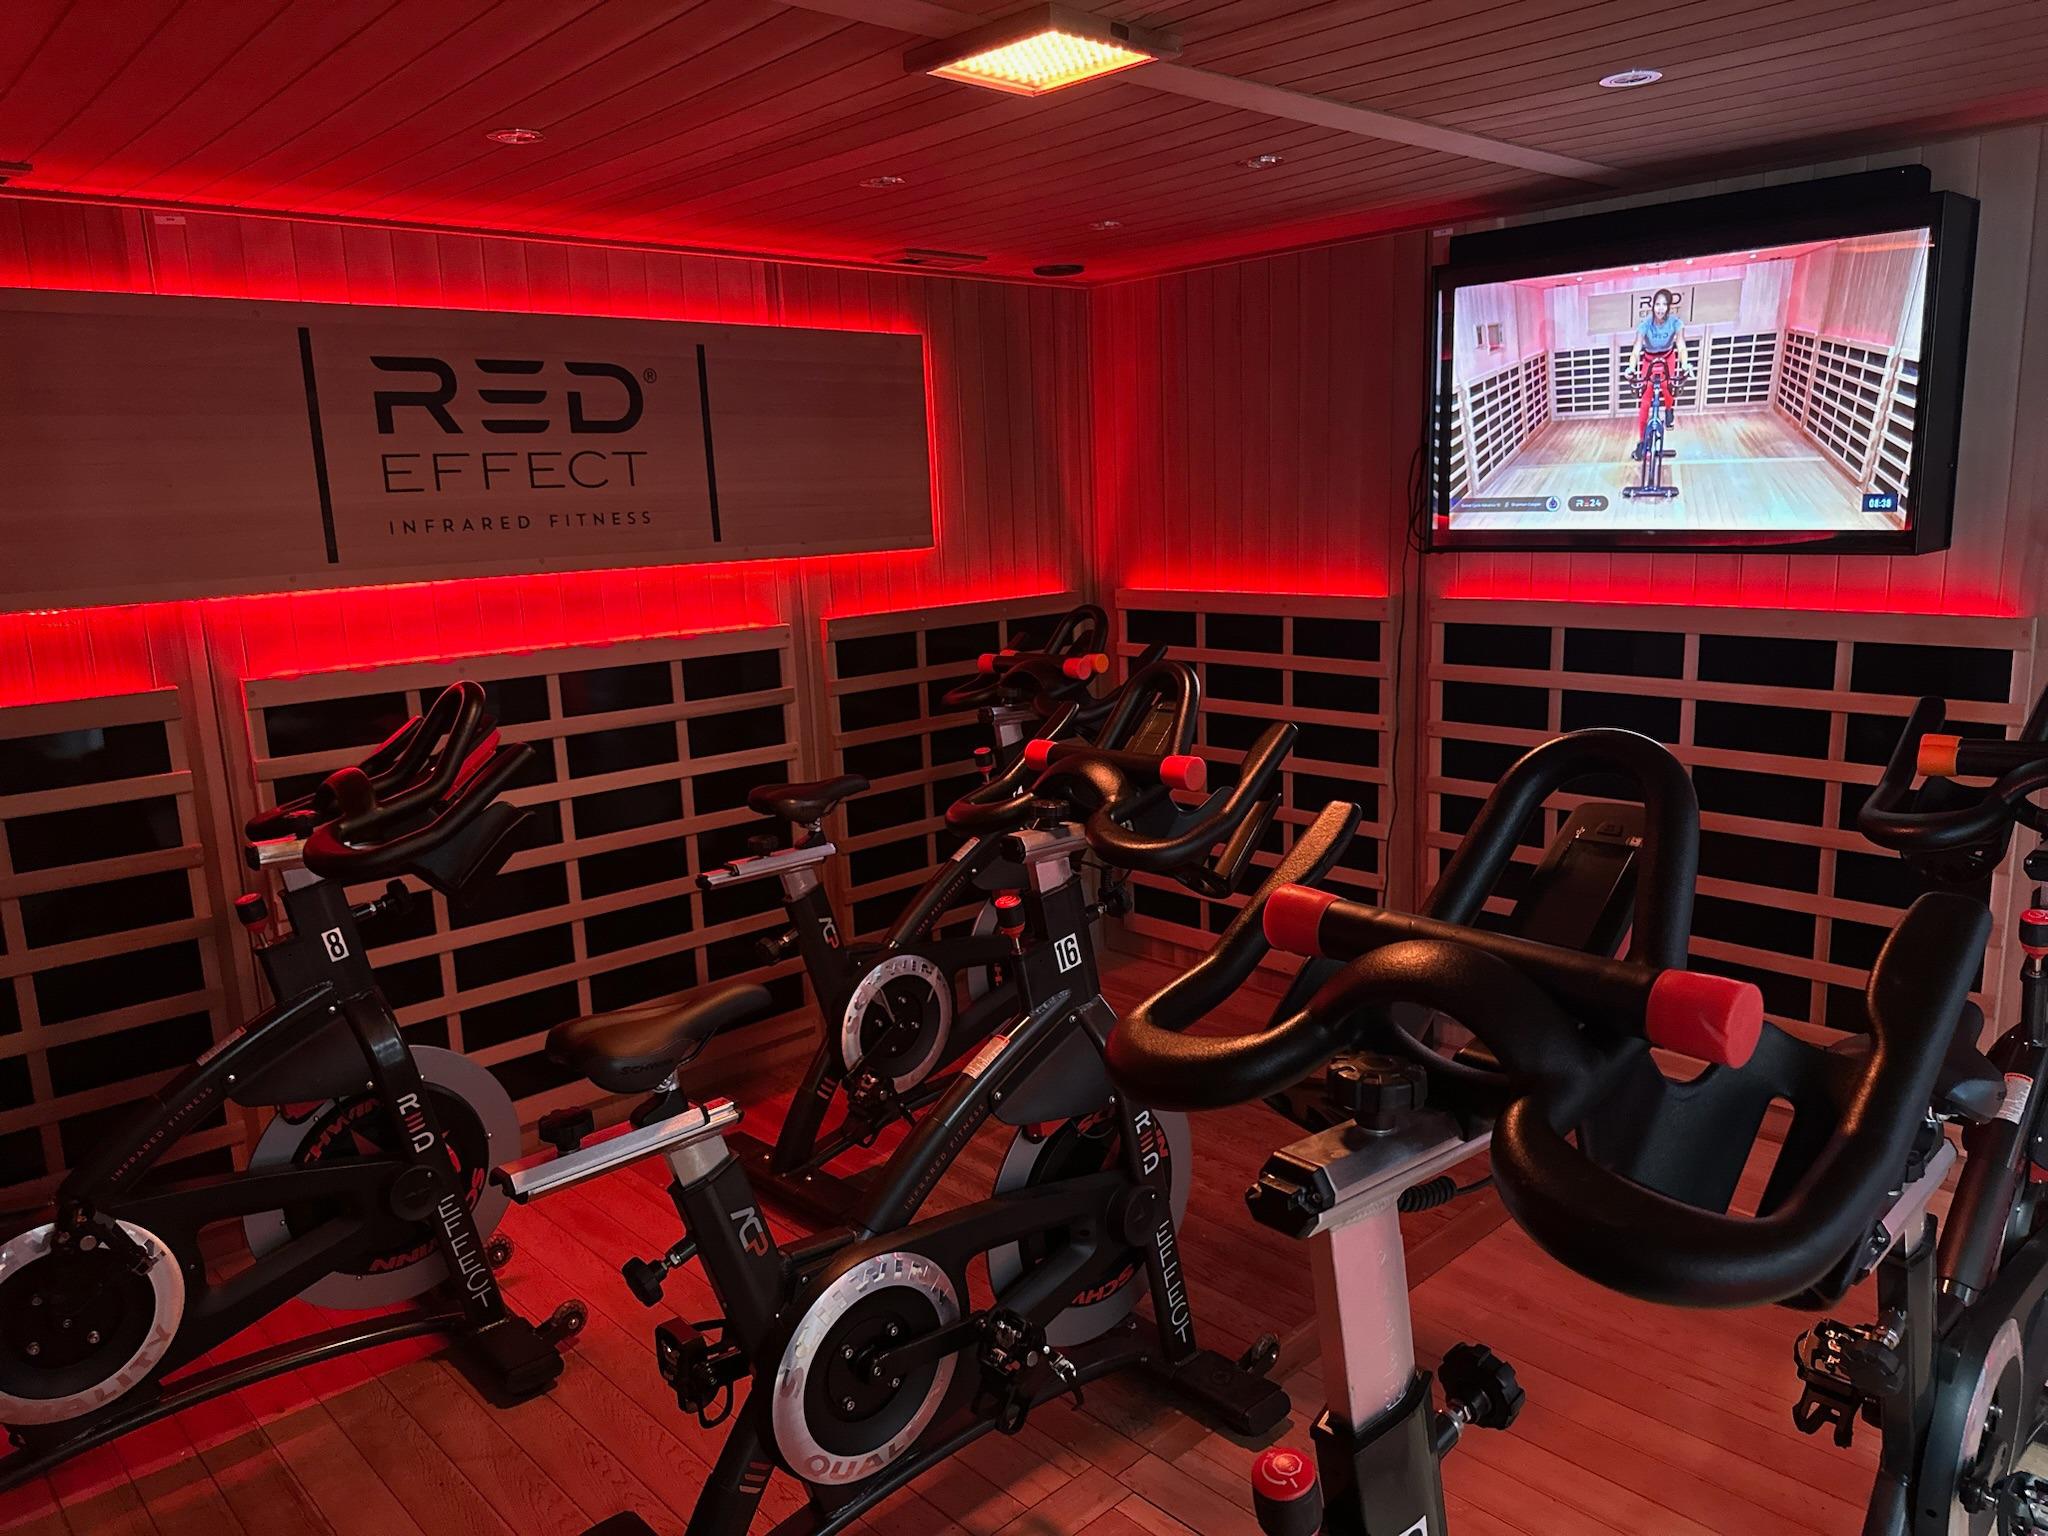 Image 8 | Red Effect Infrared Fitness